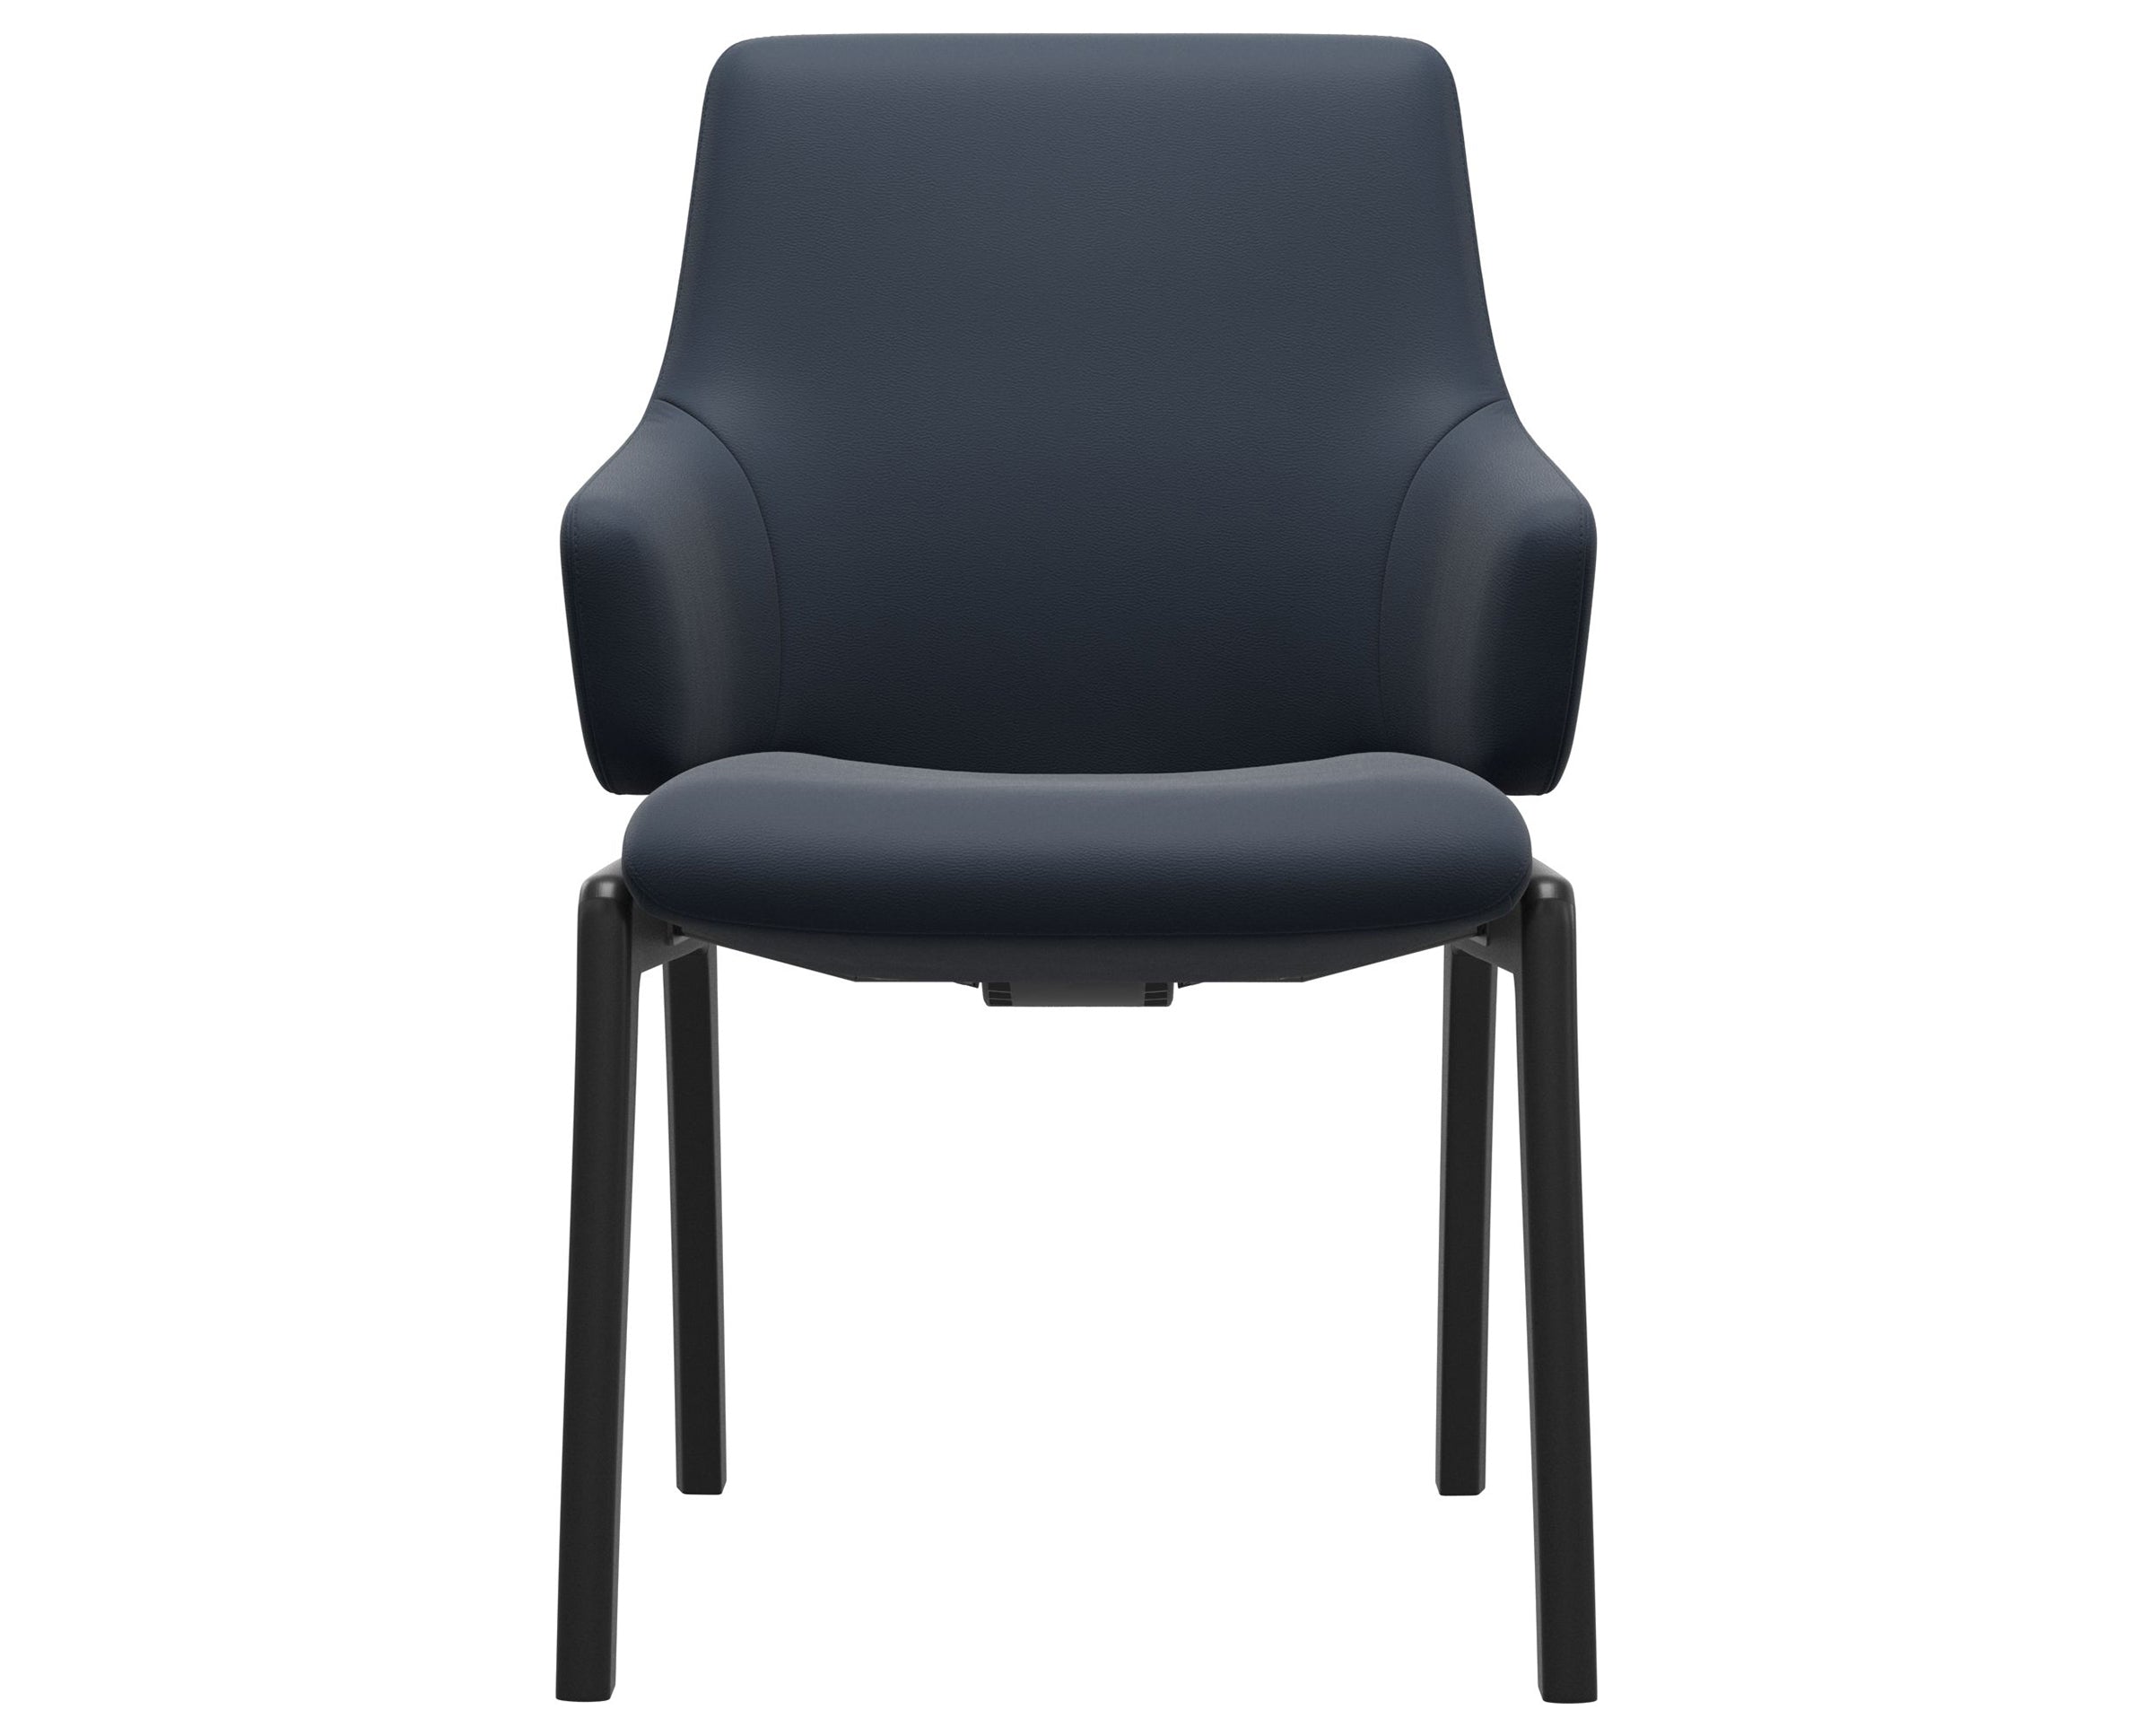 Paloma Leather Oxford Blue and Black Base | Stressless Laurel Low Back D100 Dining Chair w/Arms | Valley Ridge Furniture